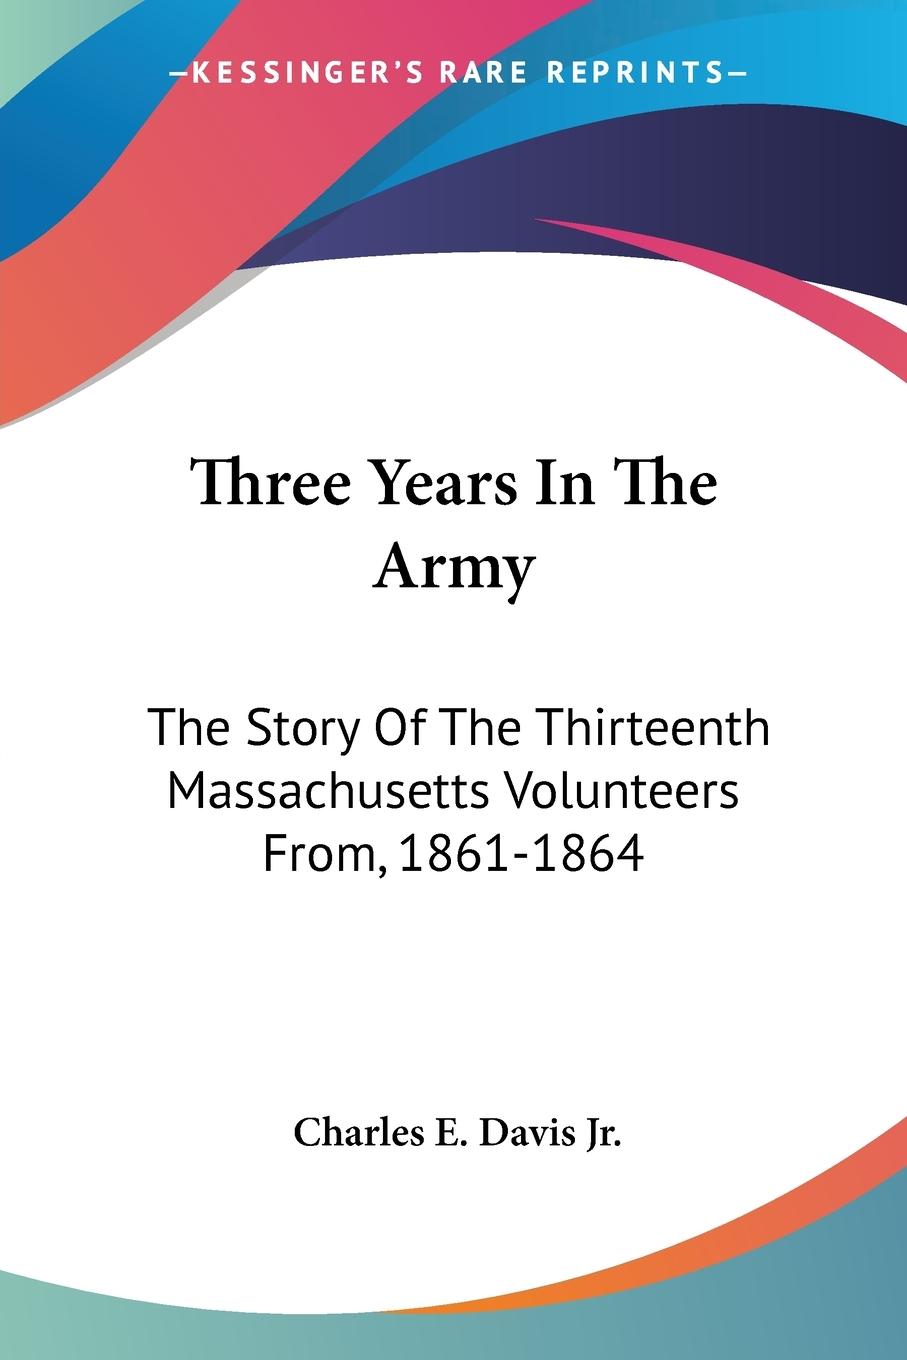 Three Years In The Army - Davis Jr., Charles E.